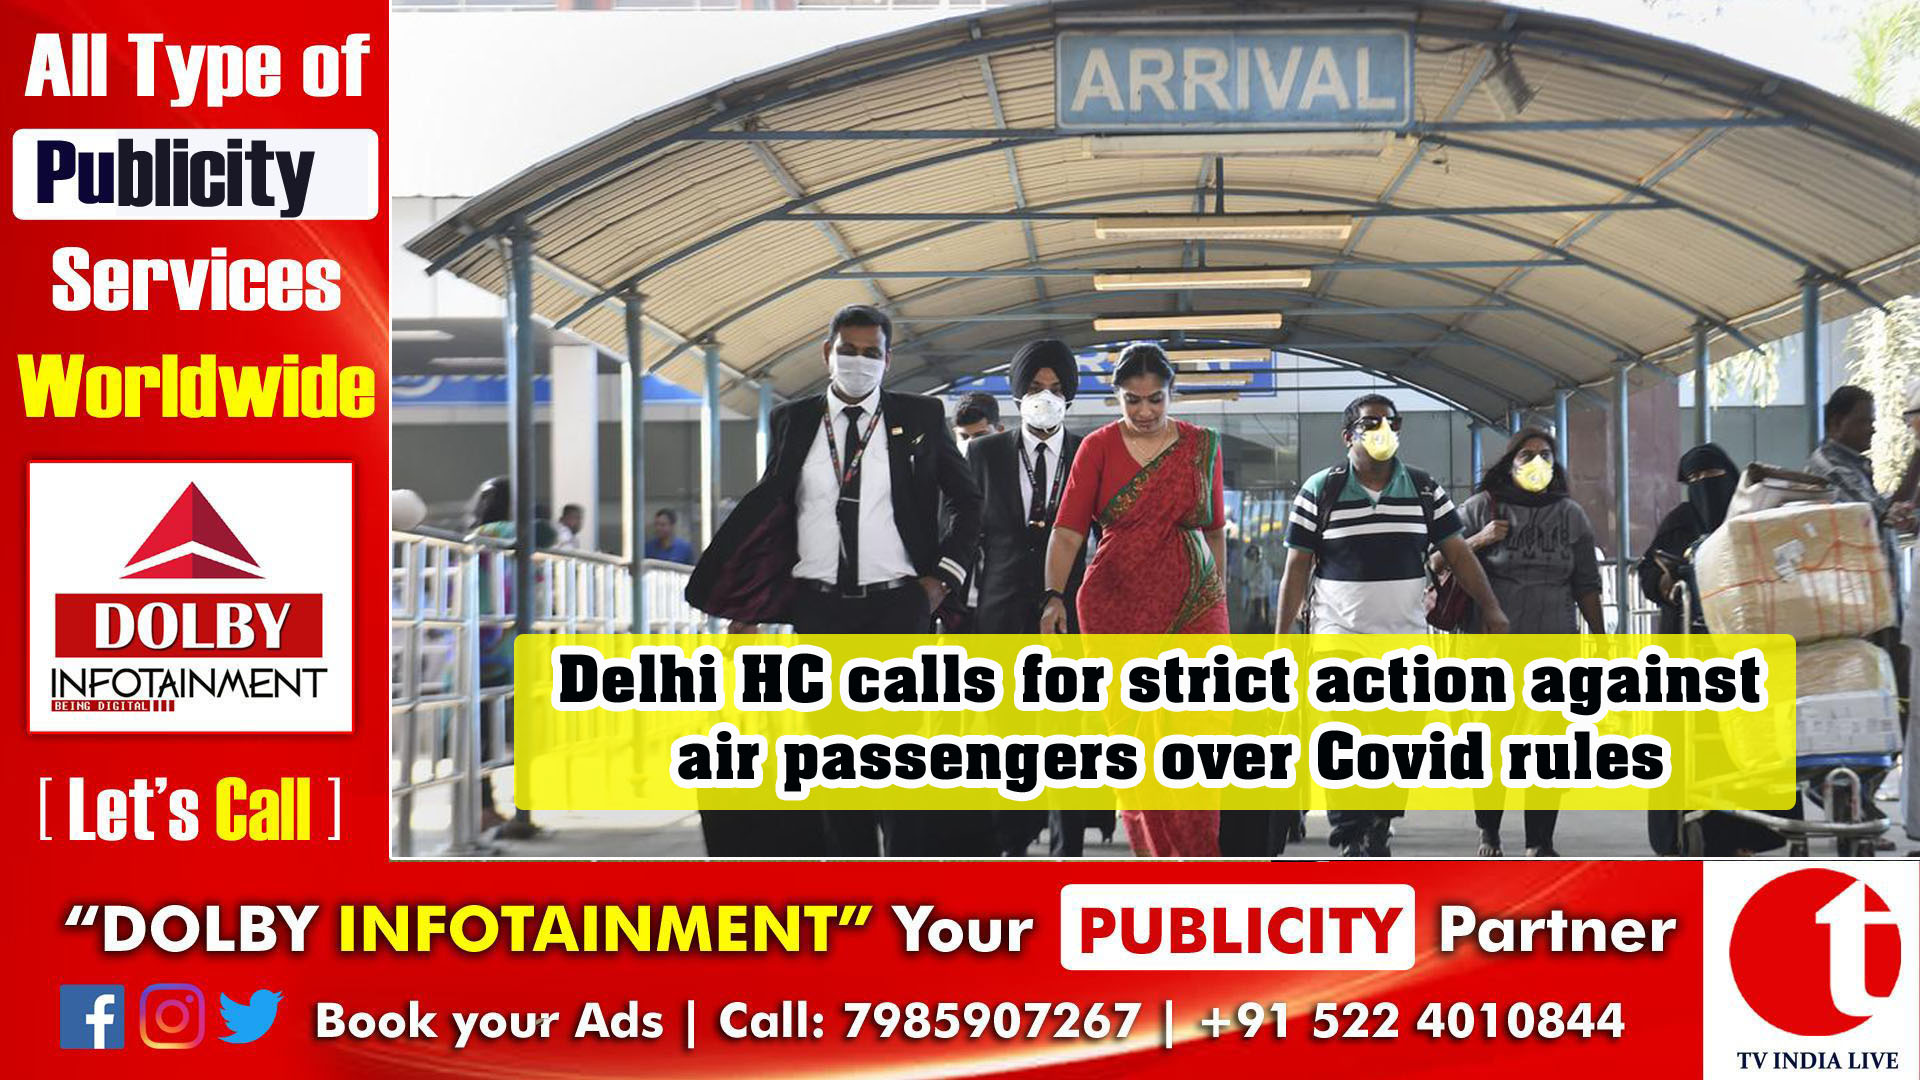 Delhi HC calls for strict action against air passengers over Covid rules